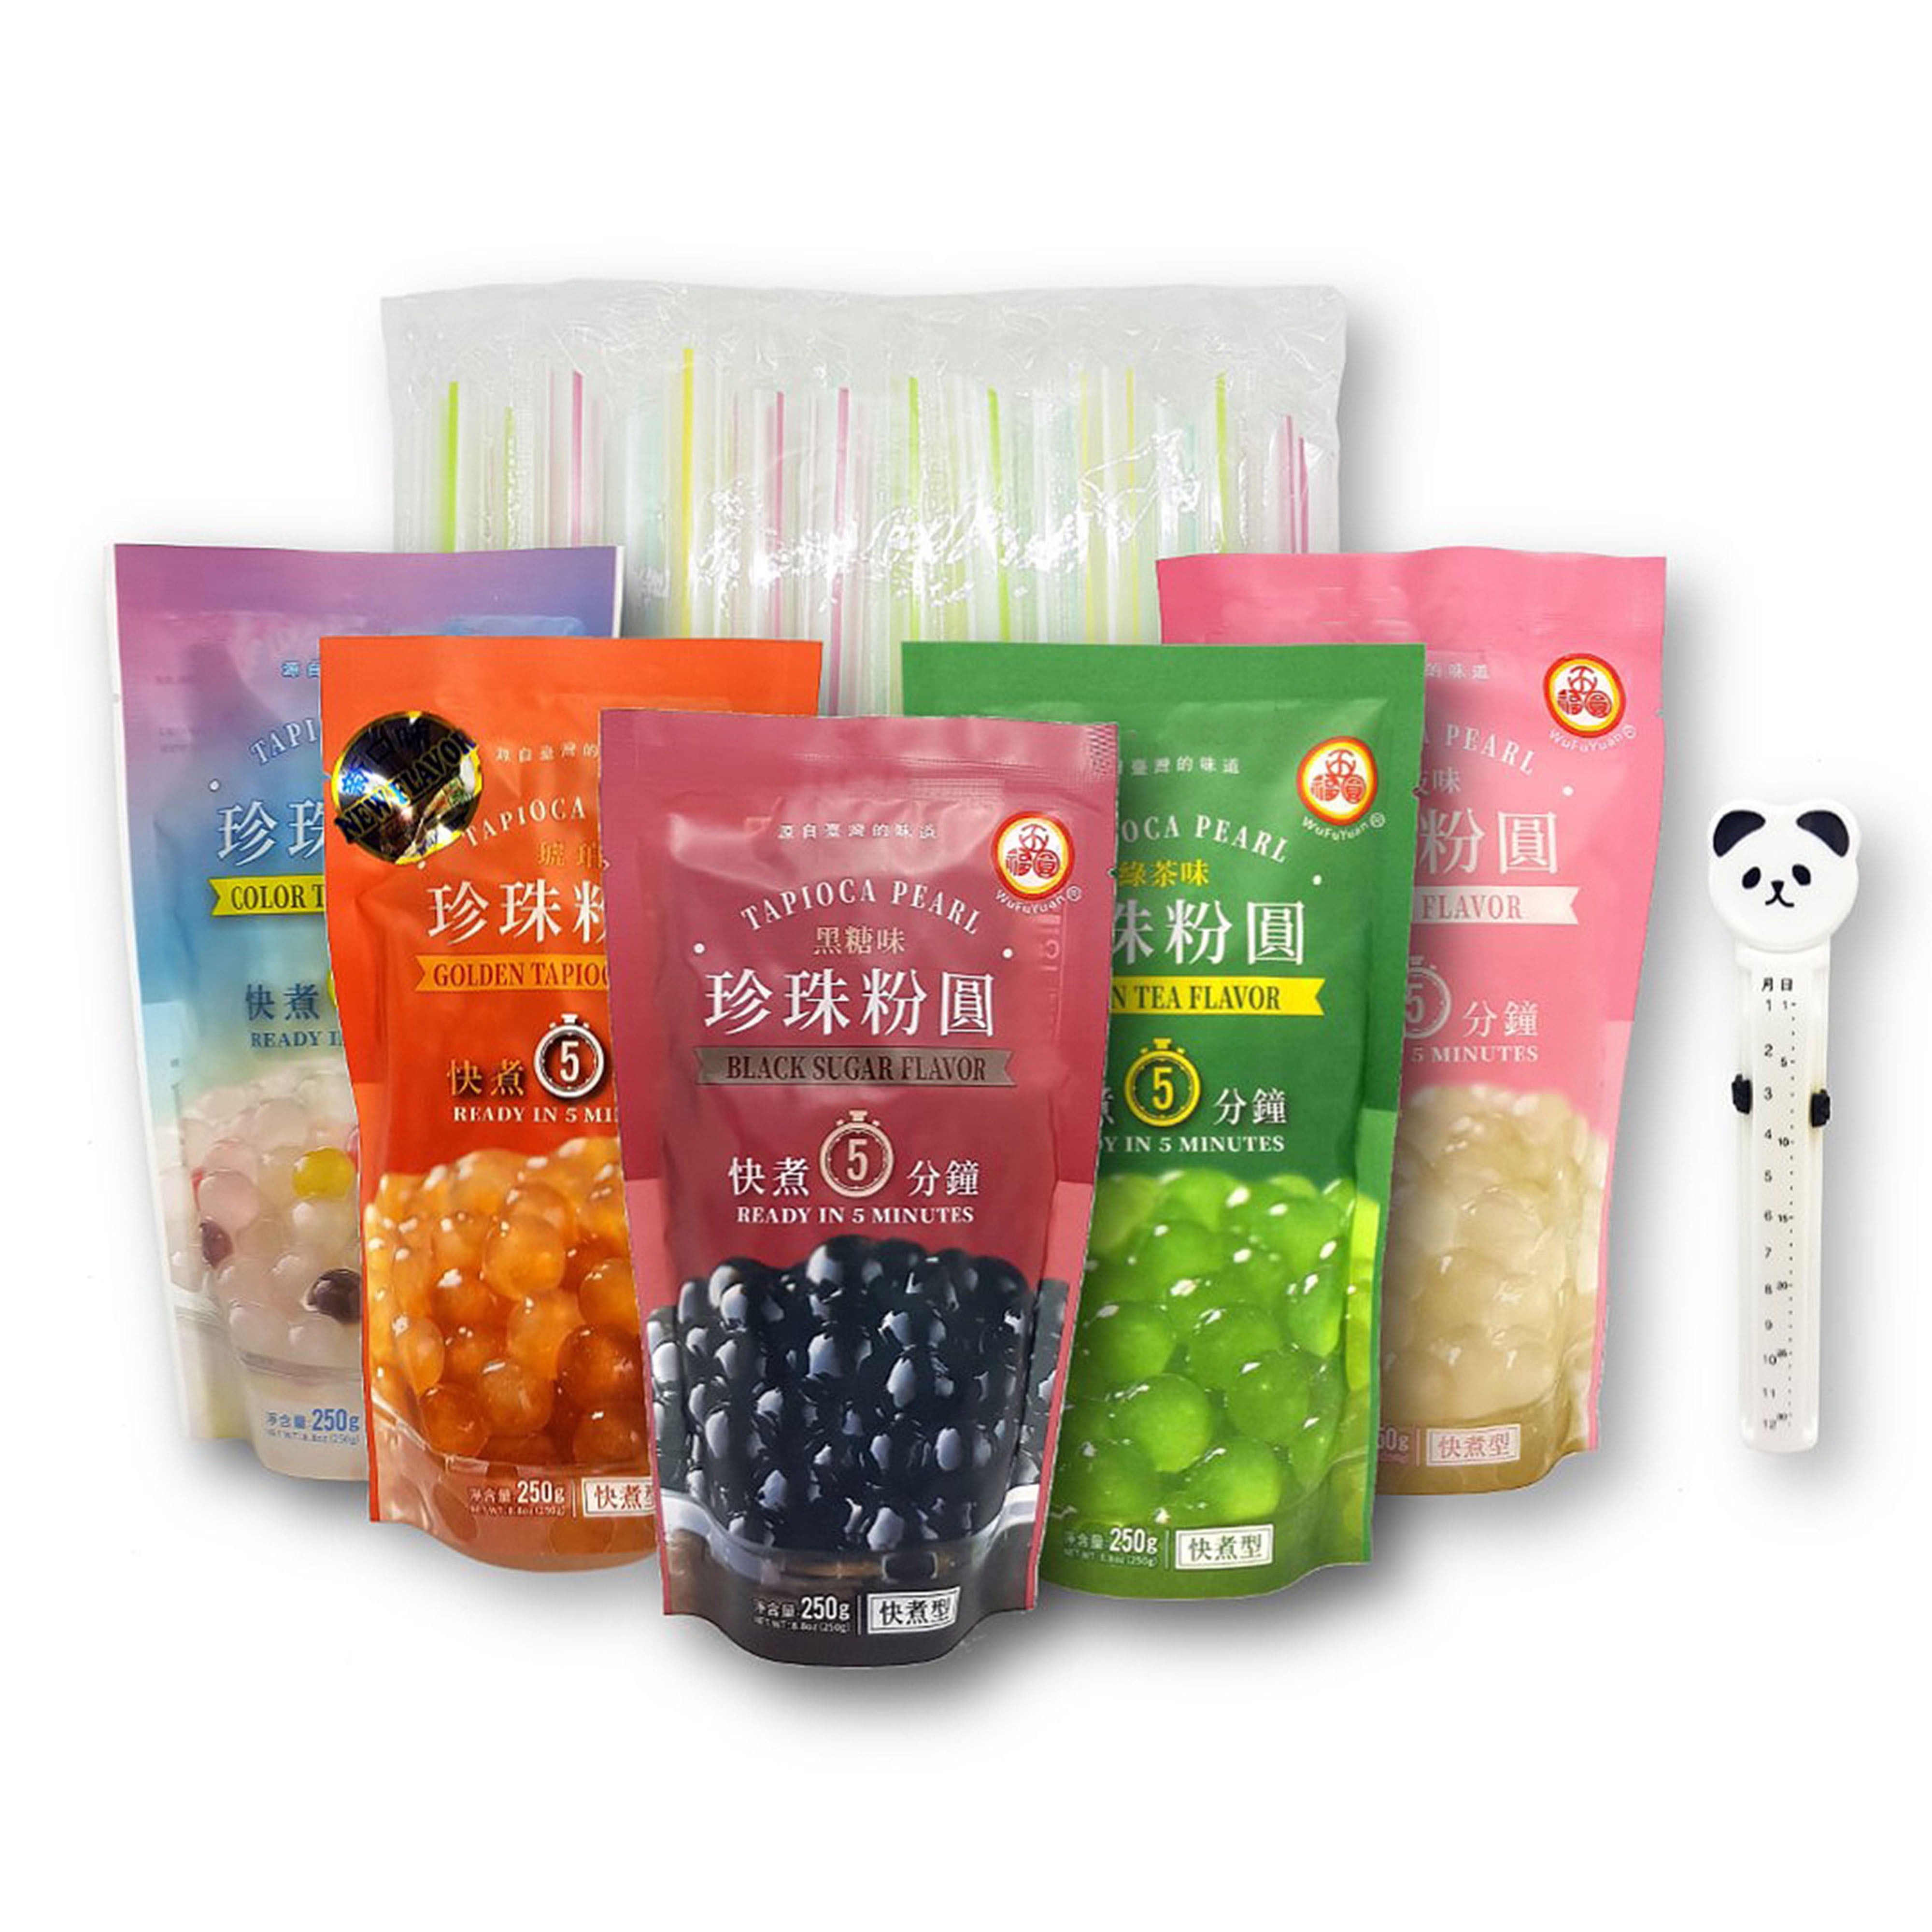  PINK 8 Boba Bubble Tea Straws by Buddha Bubbles Boba 50 Count  : Health & Household